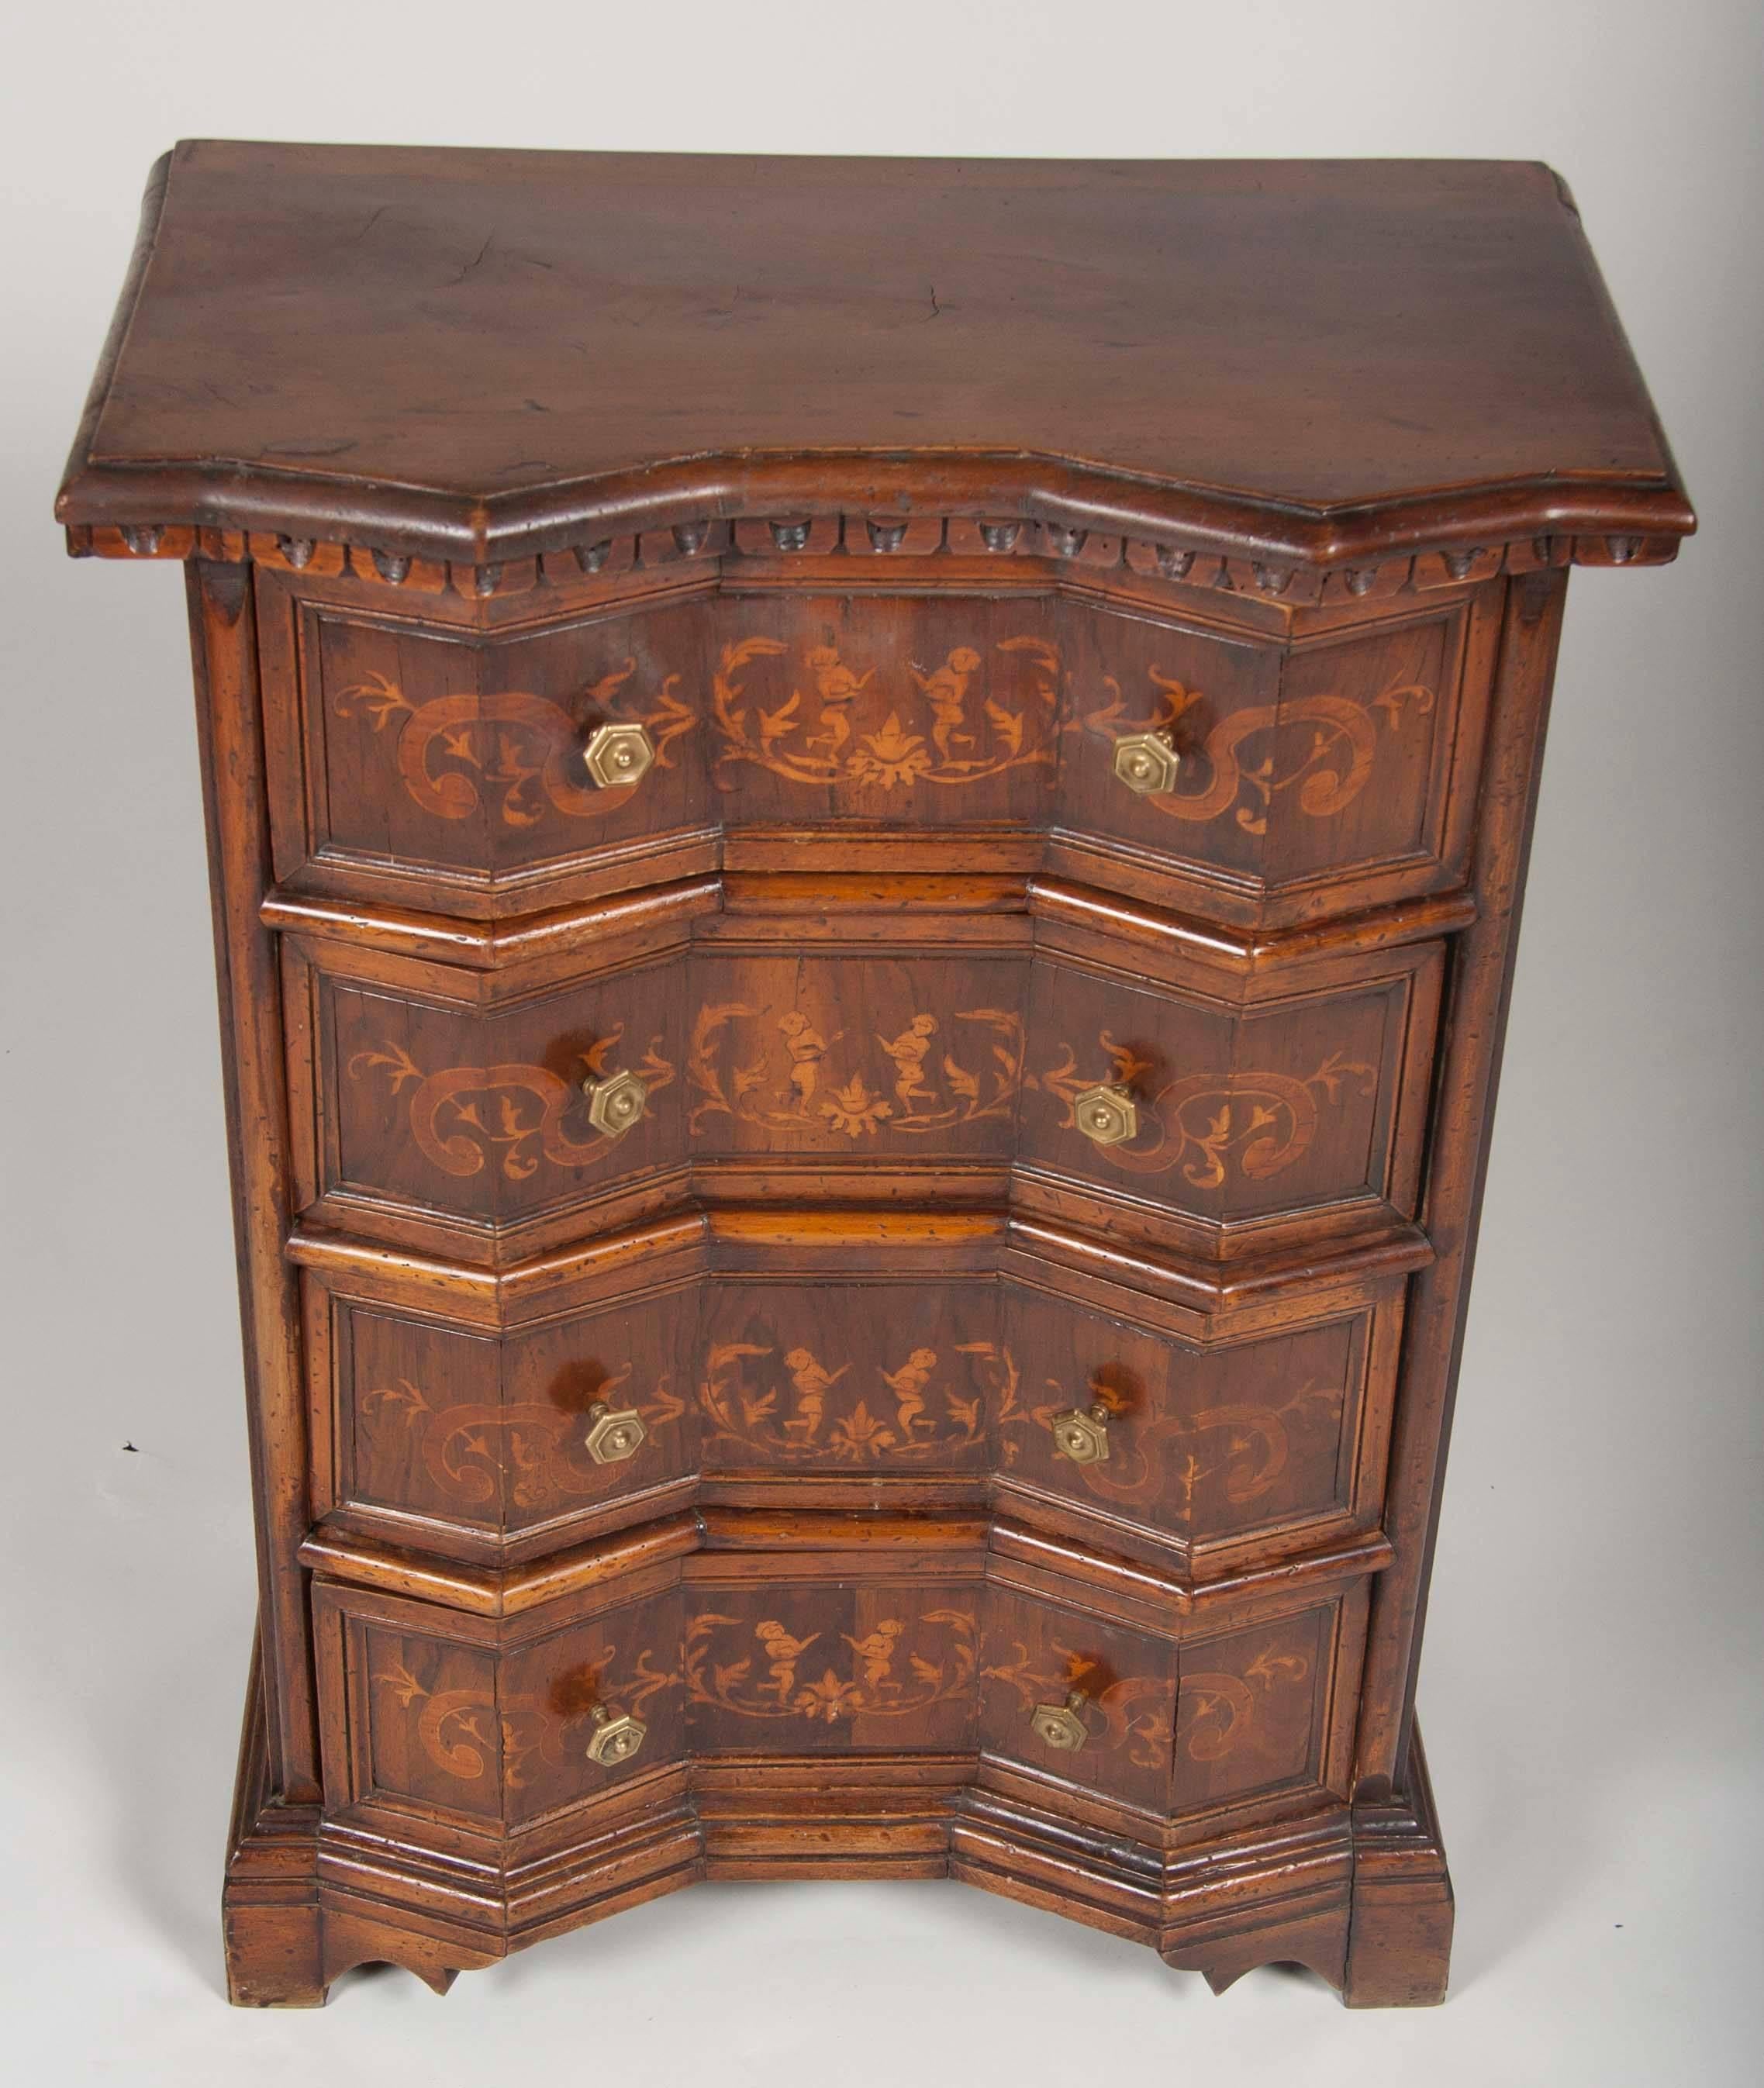 Italian Baroque style walnut 'comodino,' or chest of drawers, with fruit wood inlay and bronze hardware. Done in the Tuscan style with an appealing shaped geometric front. Great as a bedside cabinet.